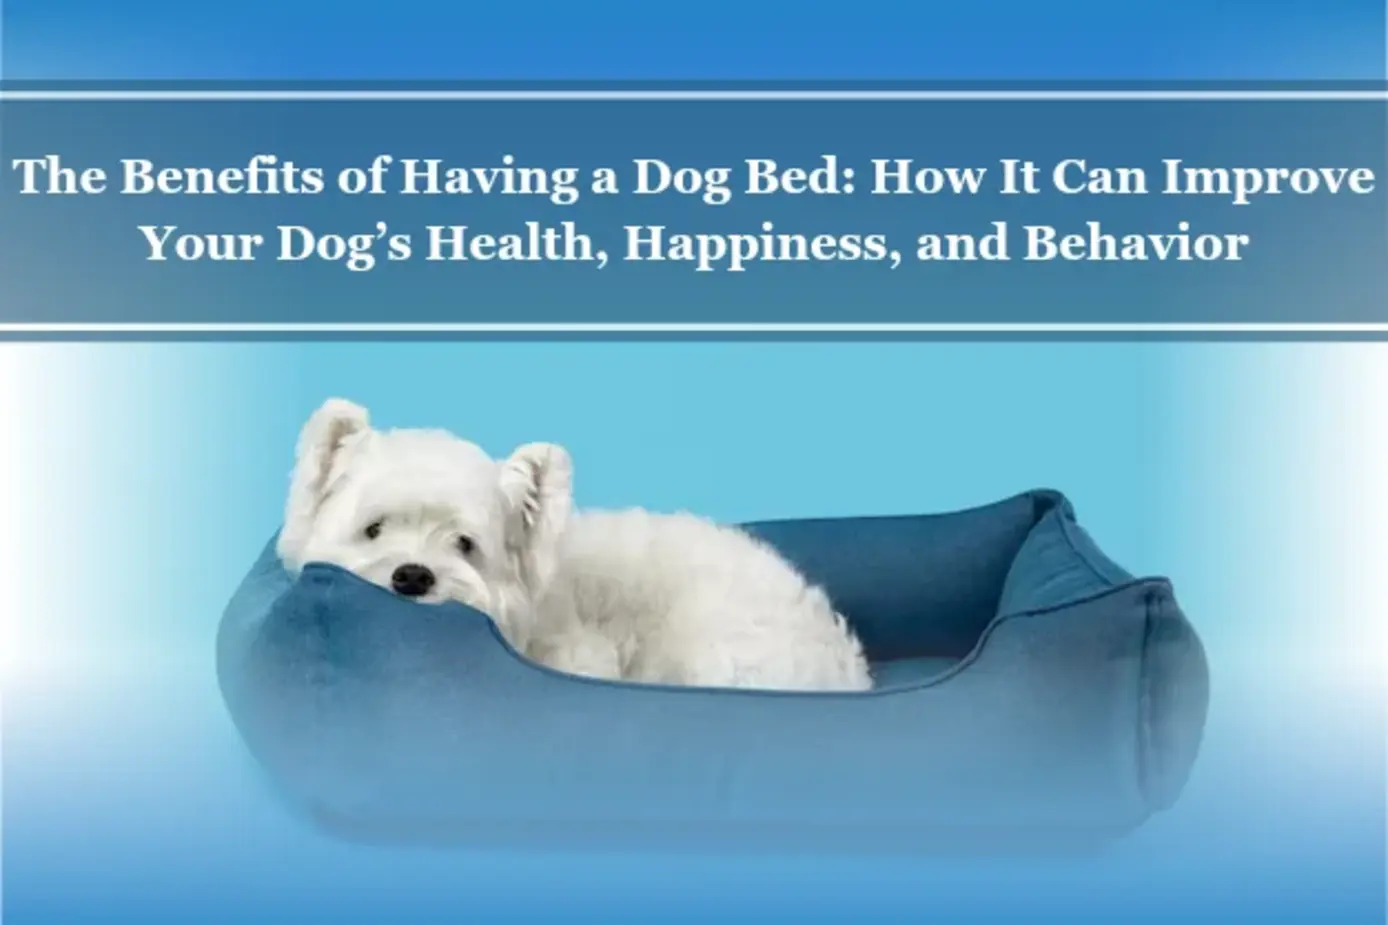 A contented dog rests comfortably on a plush dog bed, showcasing how the right bed can enhance your pet's health, happiness, and behavior.